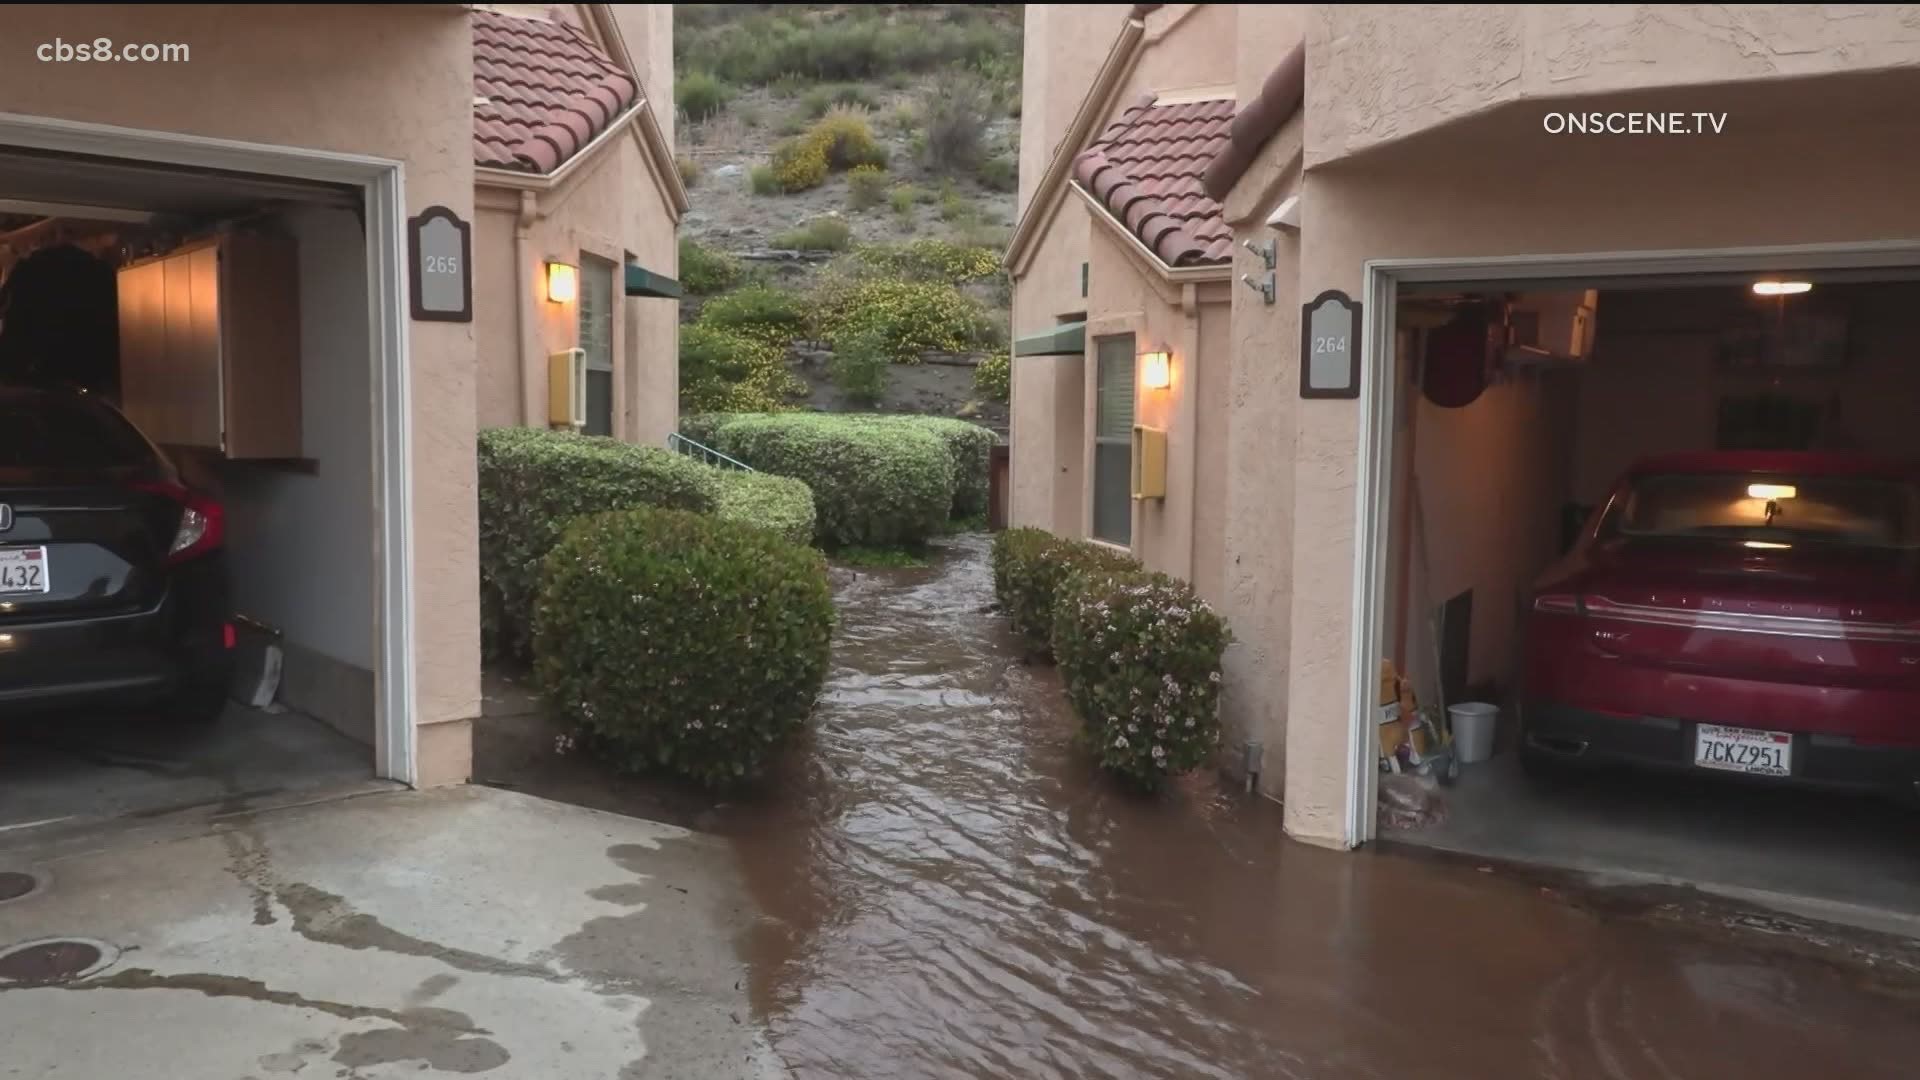 San Diego Sheriff’s evacuated eight units and weighed evacuating the entire community due to the risk of a mudslide.